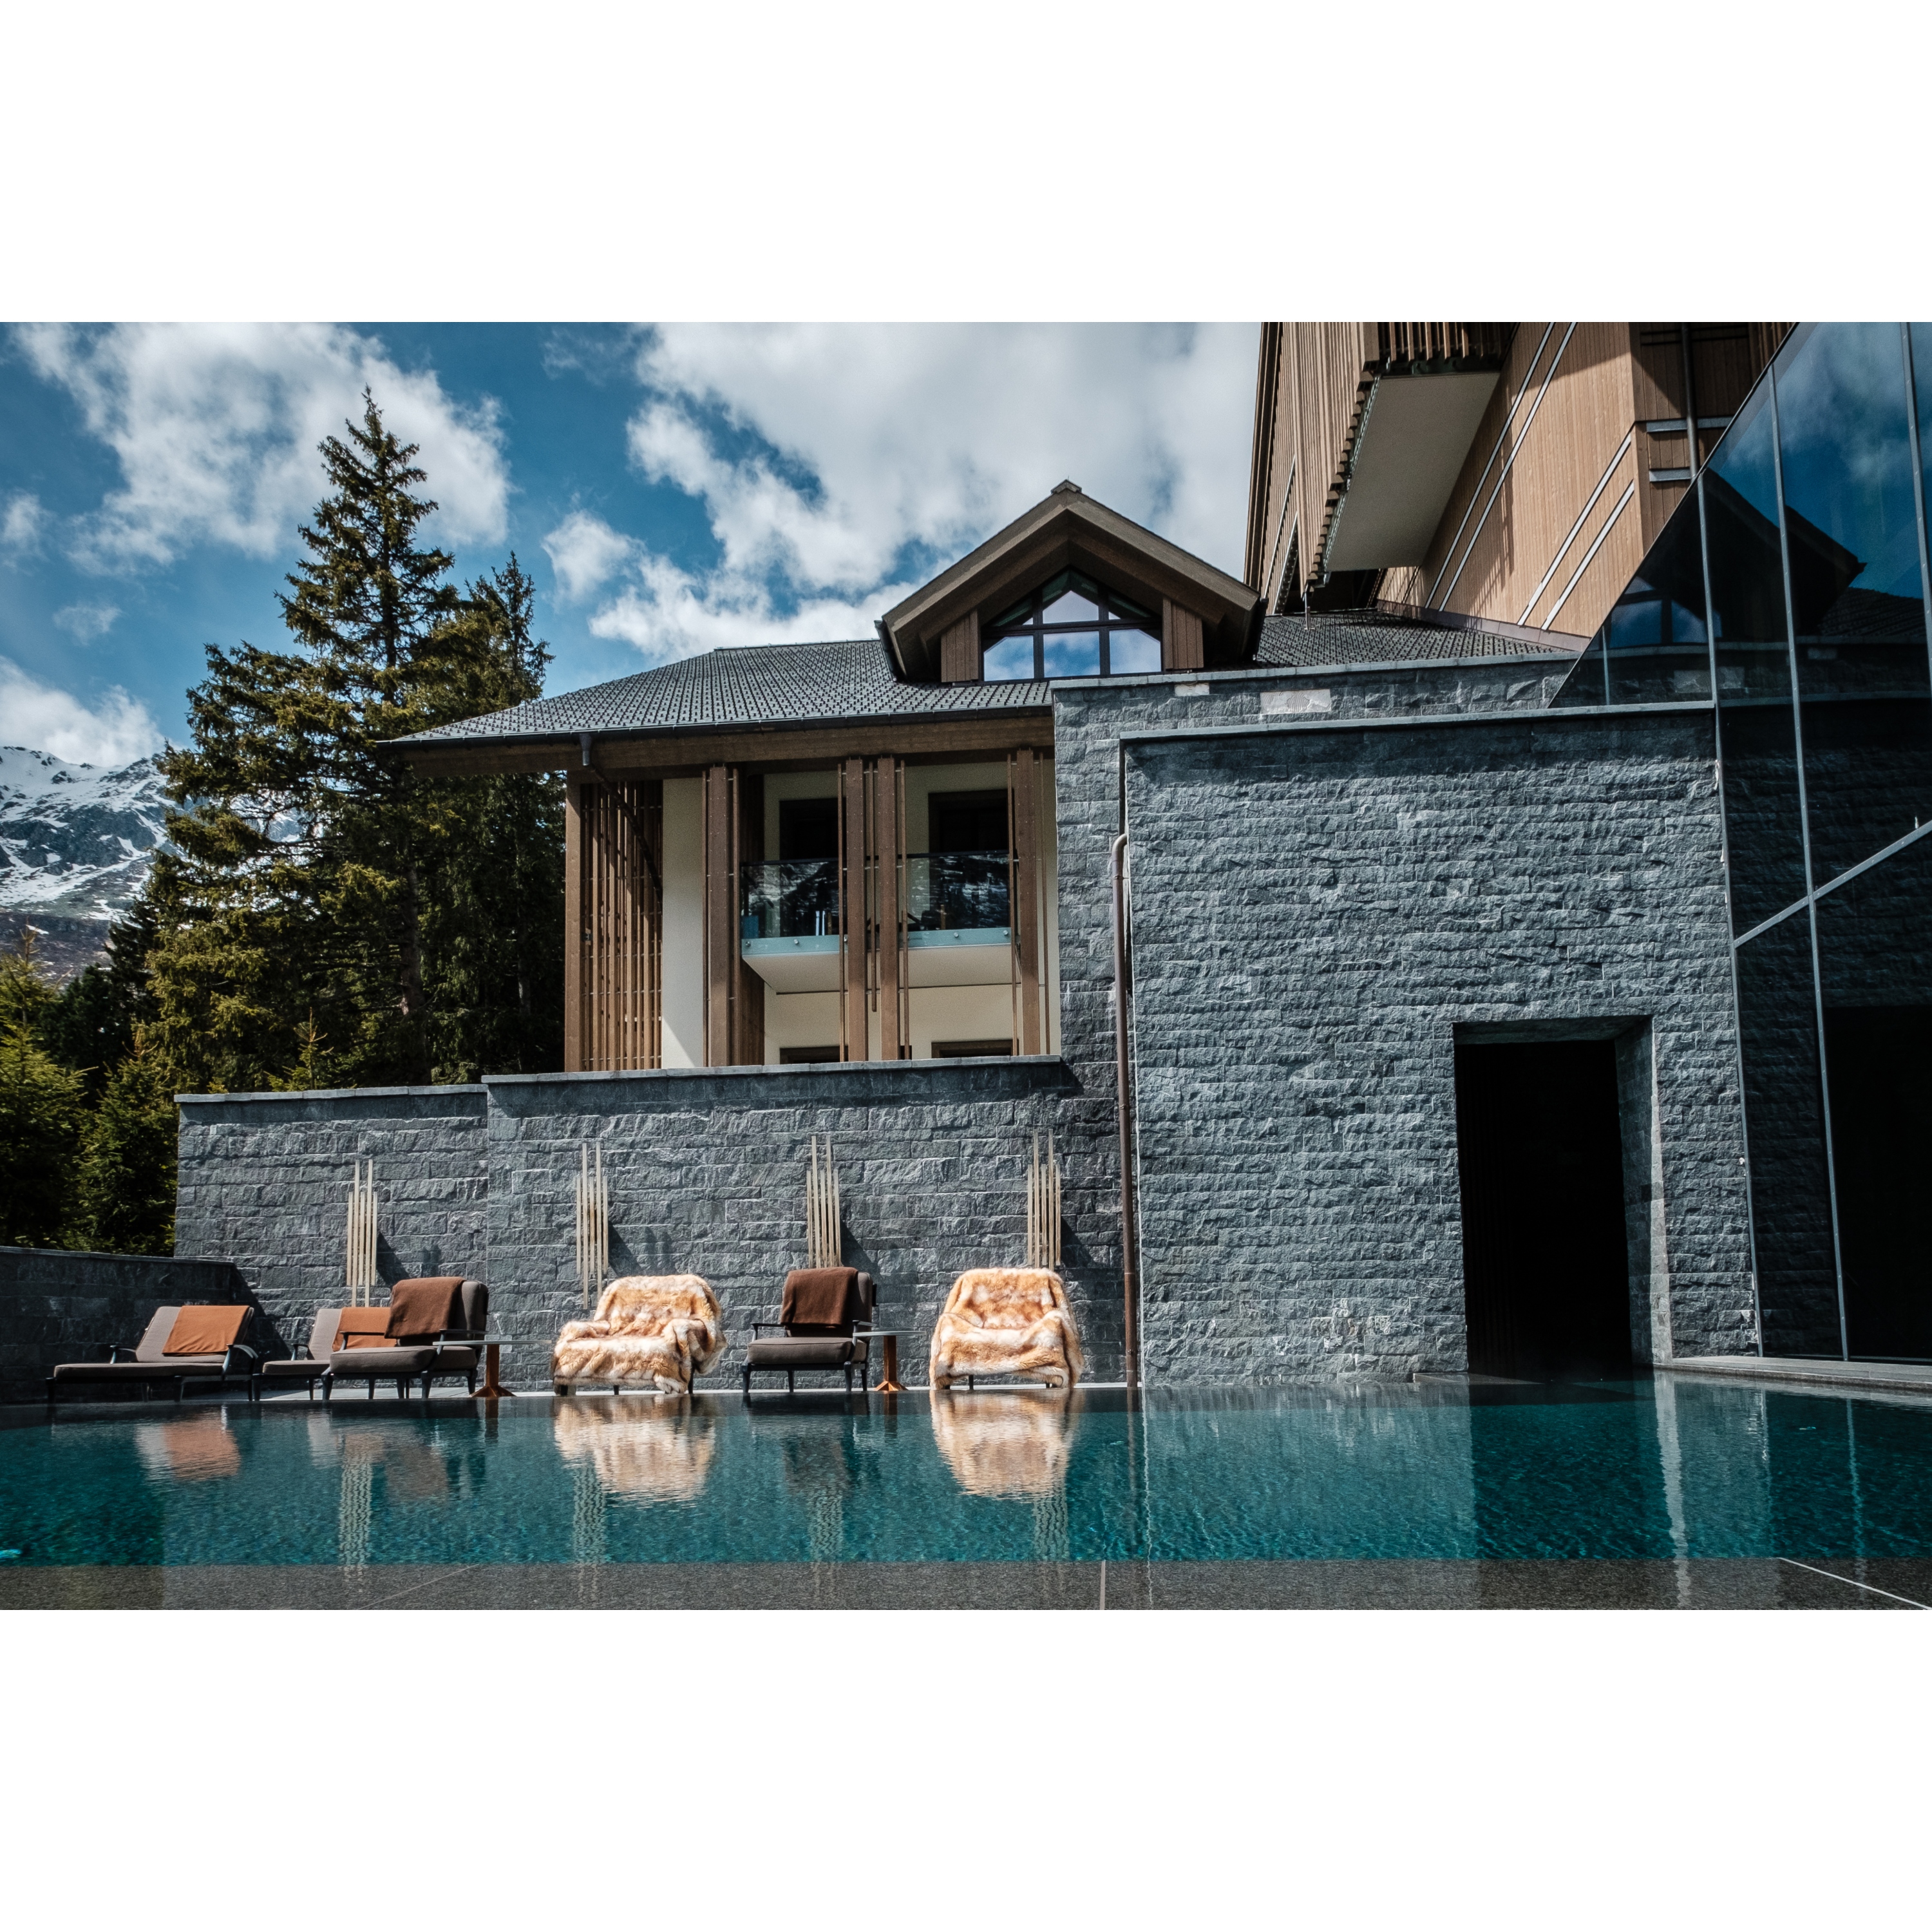 Outdoor pool of at the spa hotel in Switzerland The Chedi Andermatt. With its entrance and sunbeds placed in the sun.